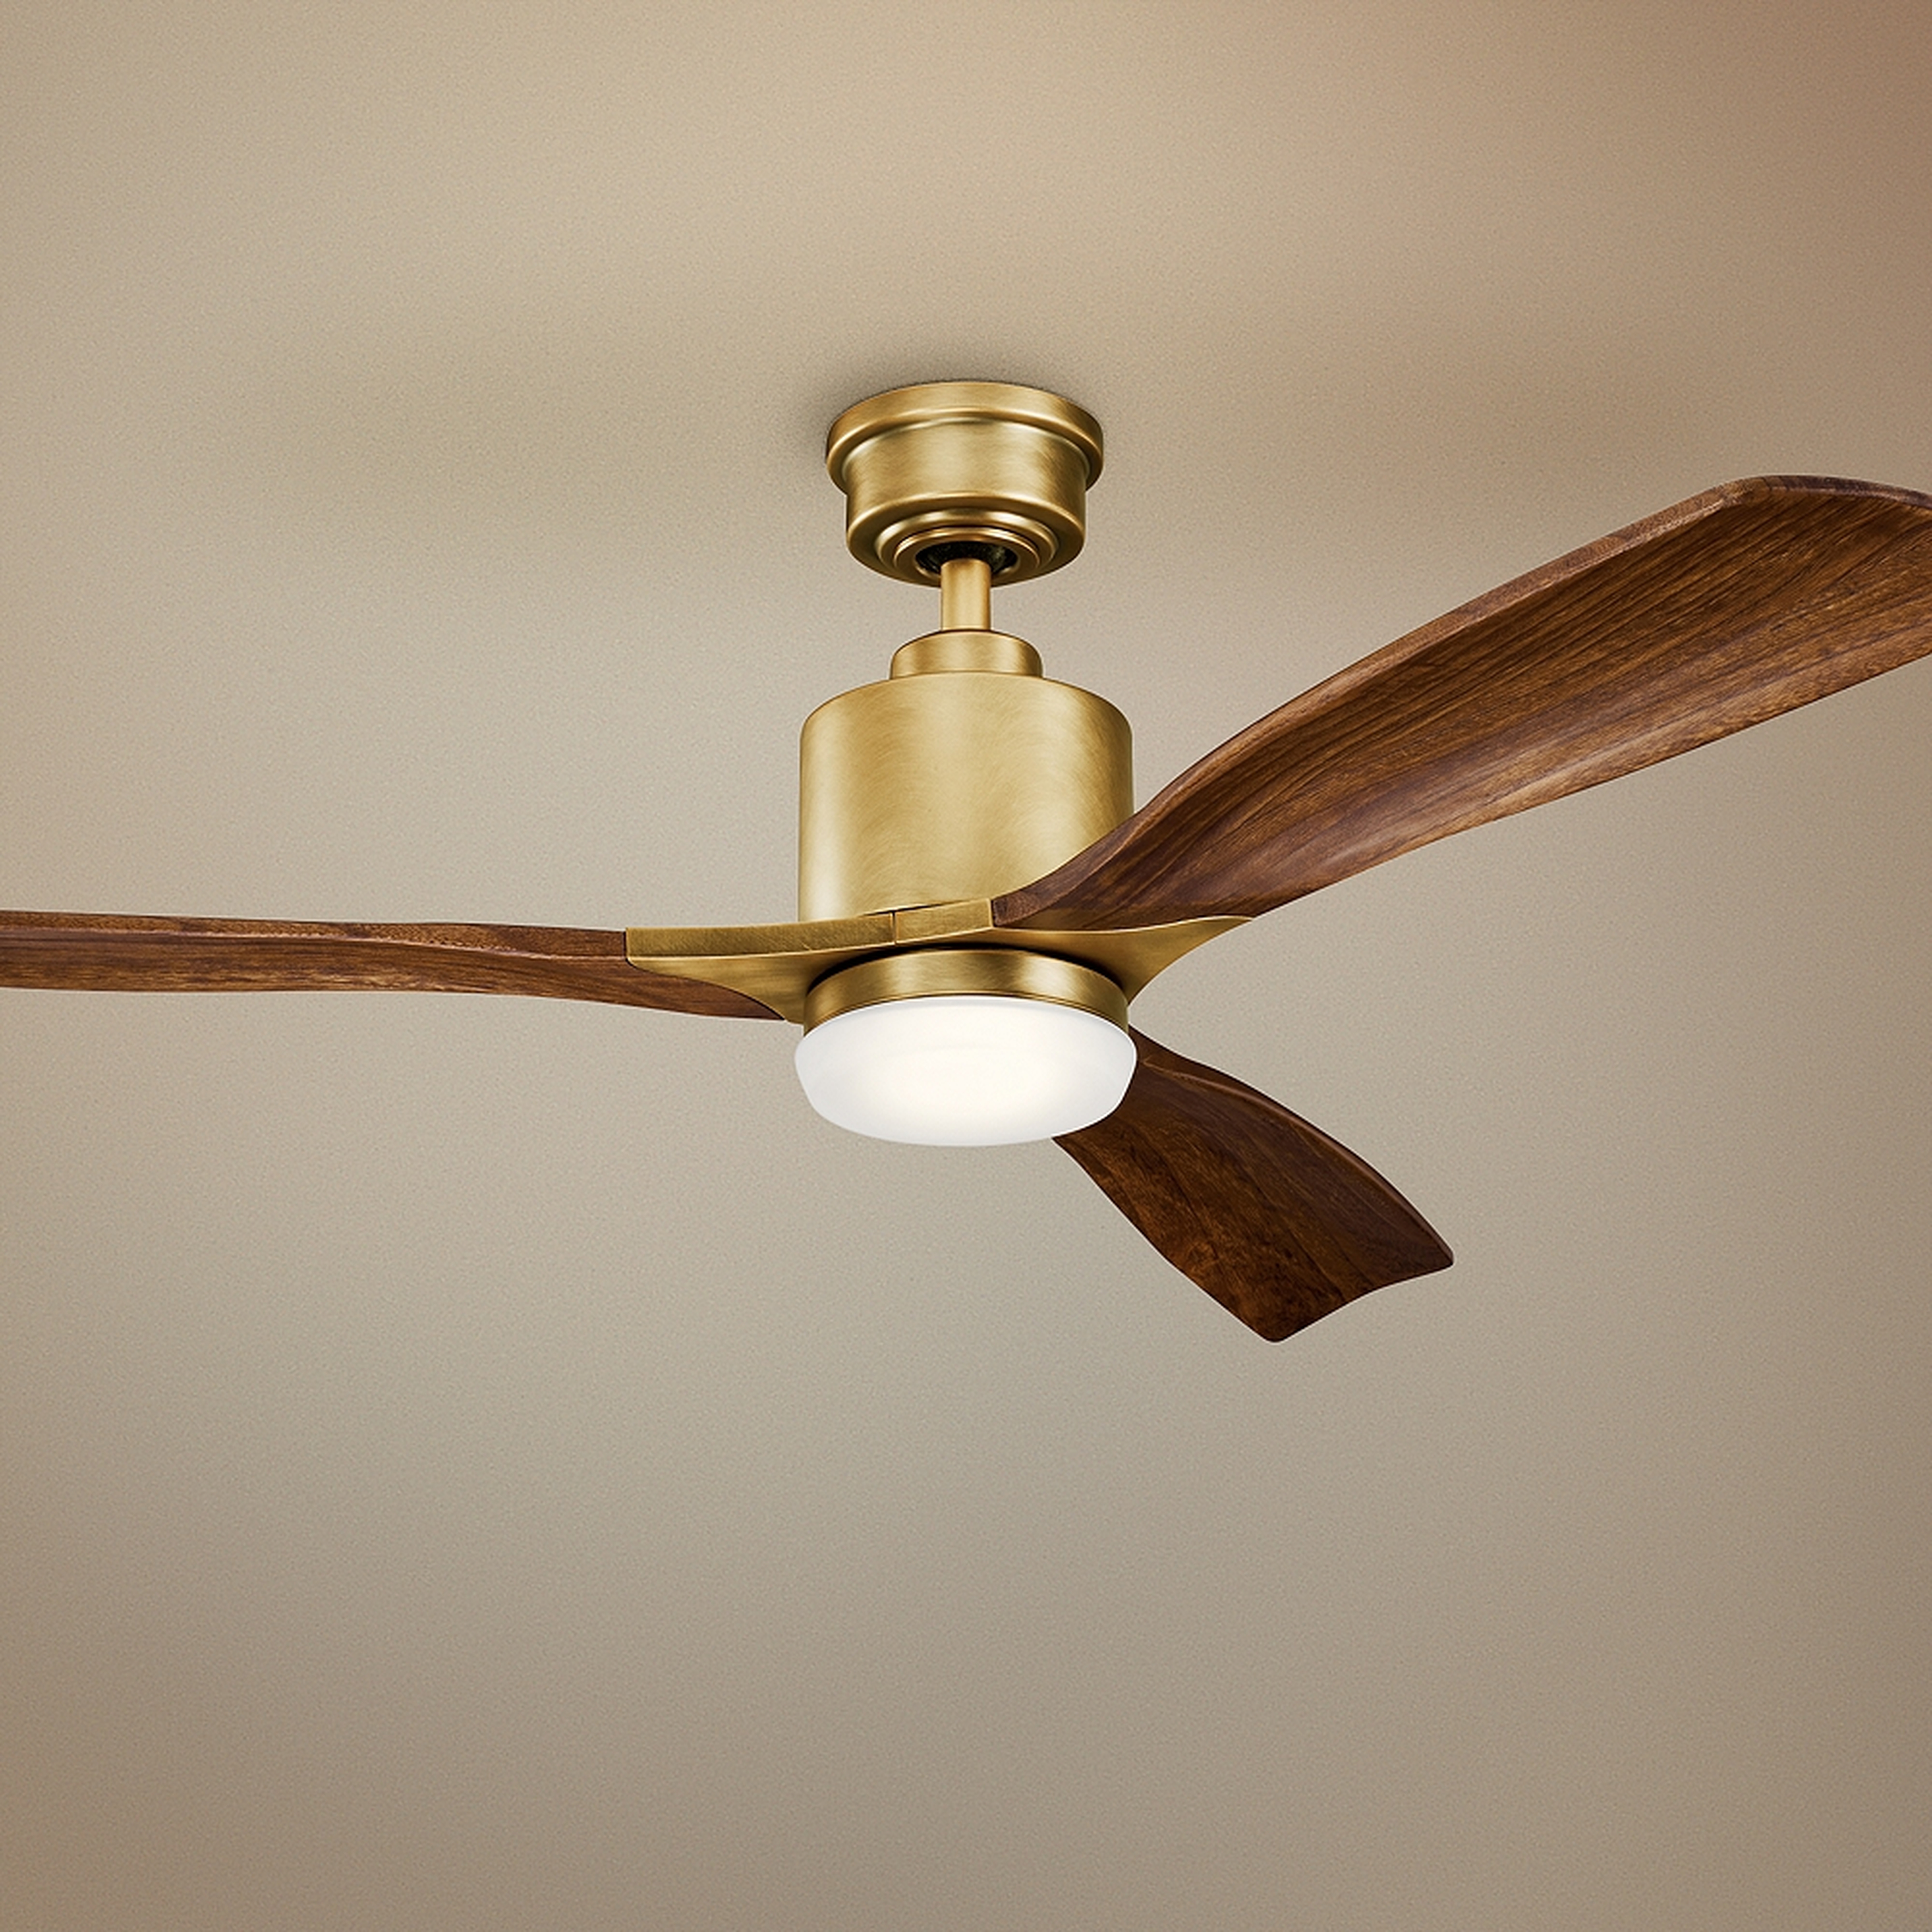 52" Kichler Ridley II Natural Brass LED Ceiling Fan - Style # 66W63 - Lamps Plus